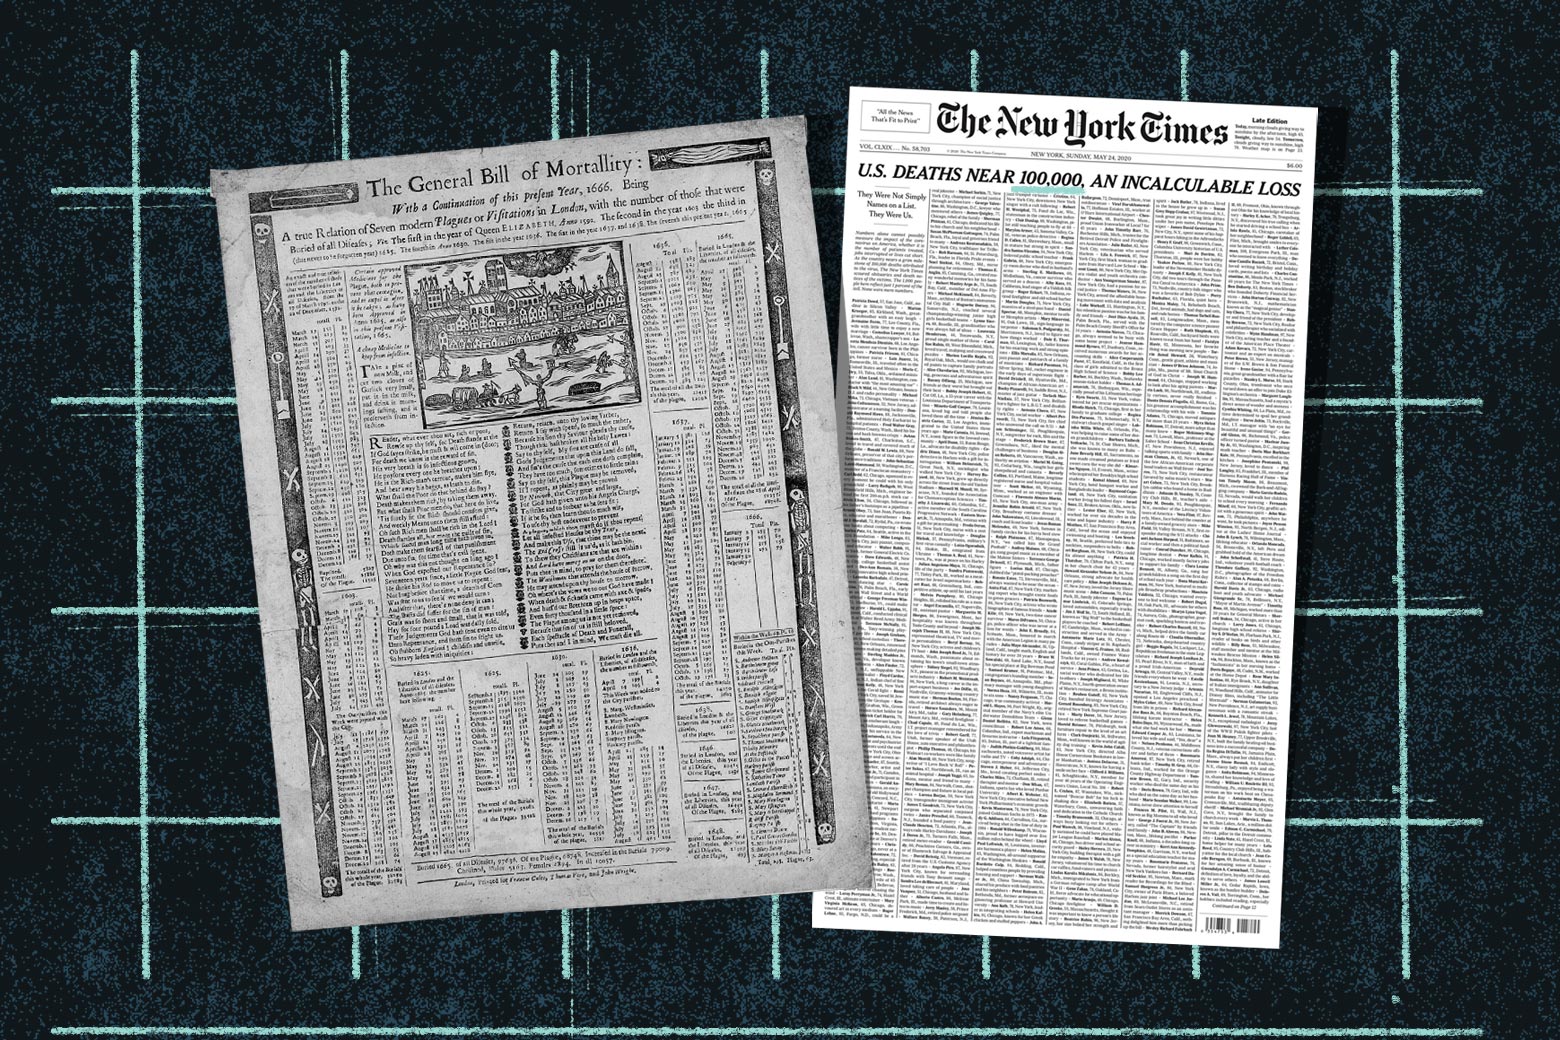 A "Bill of Mortality" next to the 100,000 COVID deaths New York Times front page.